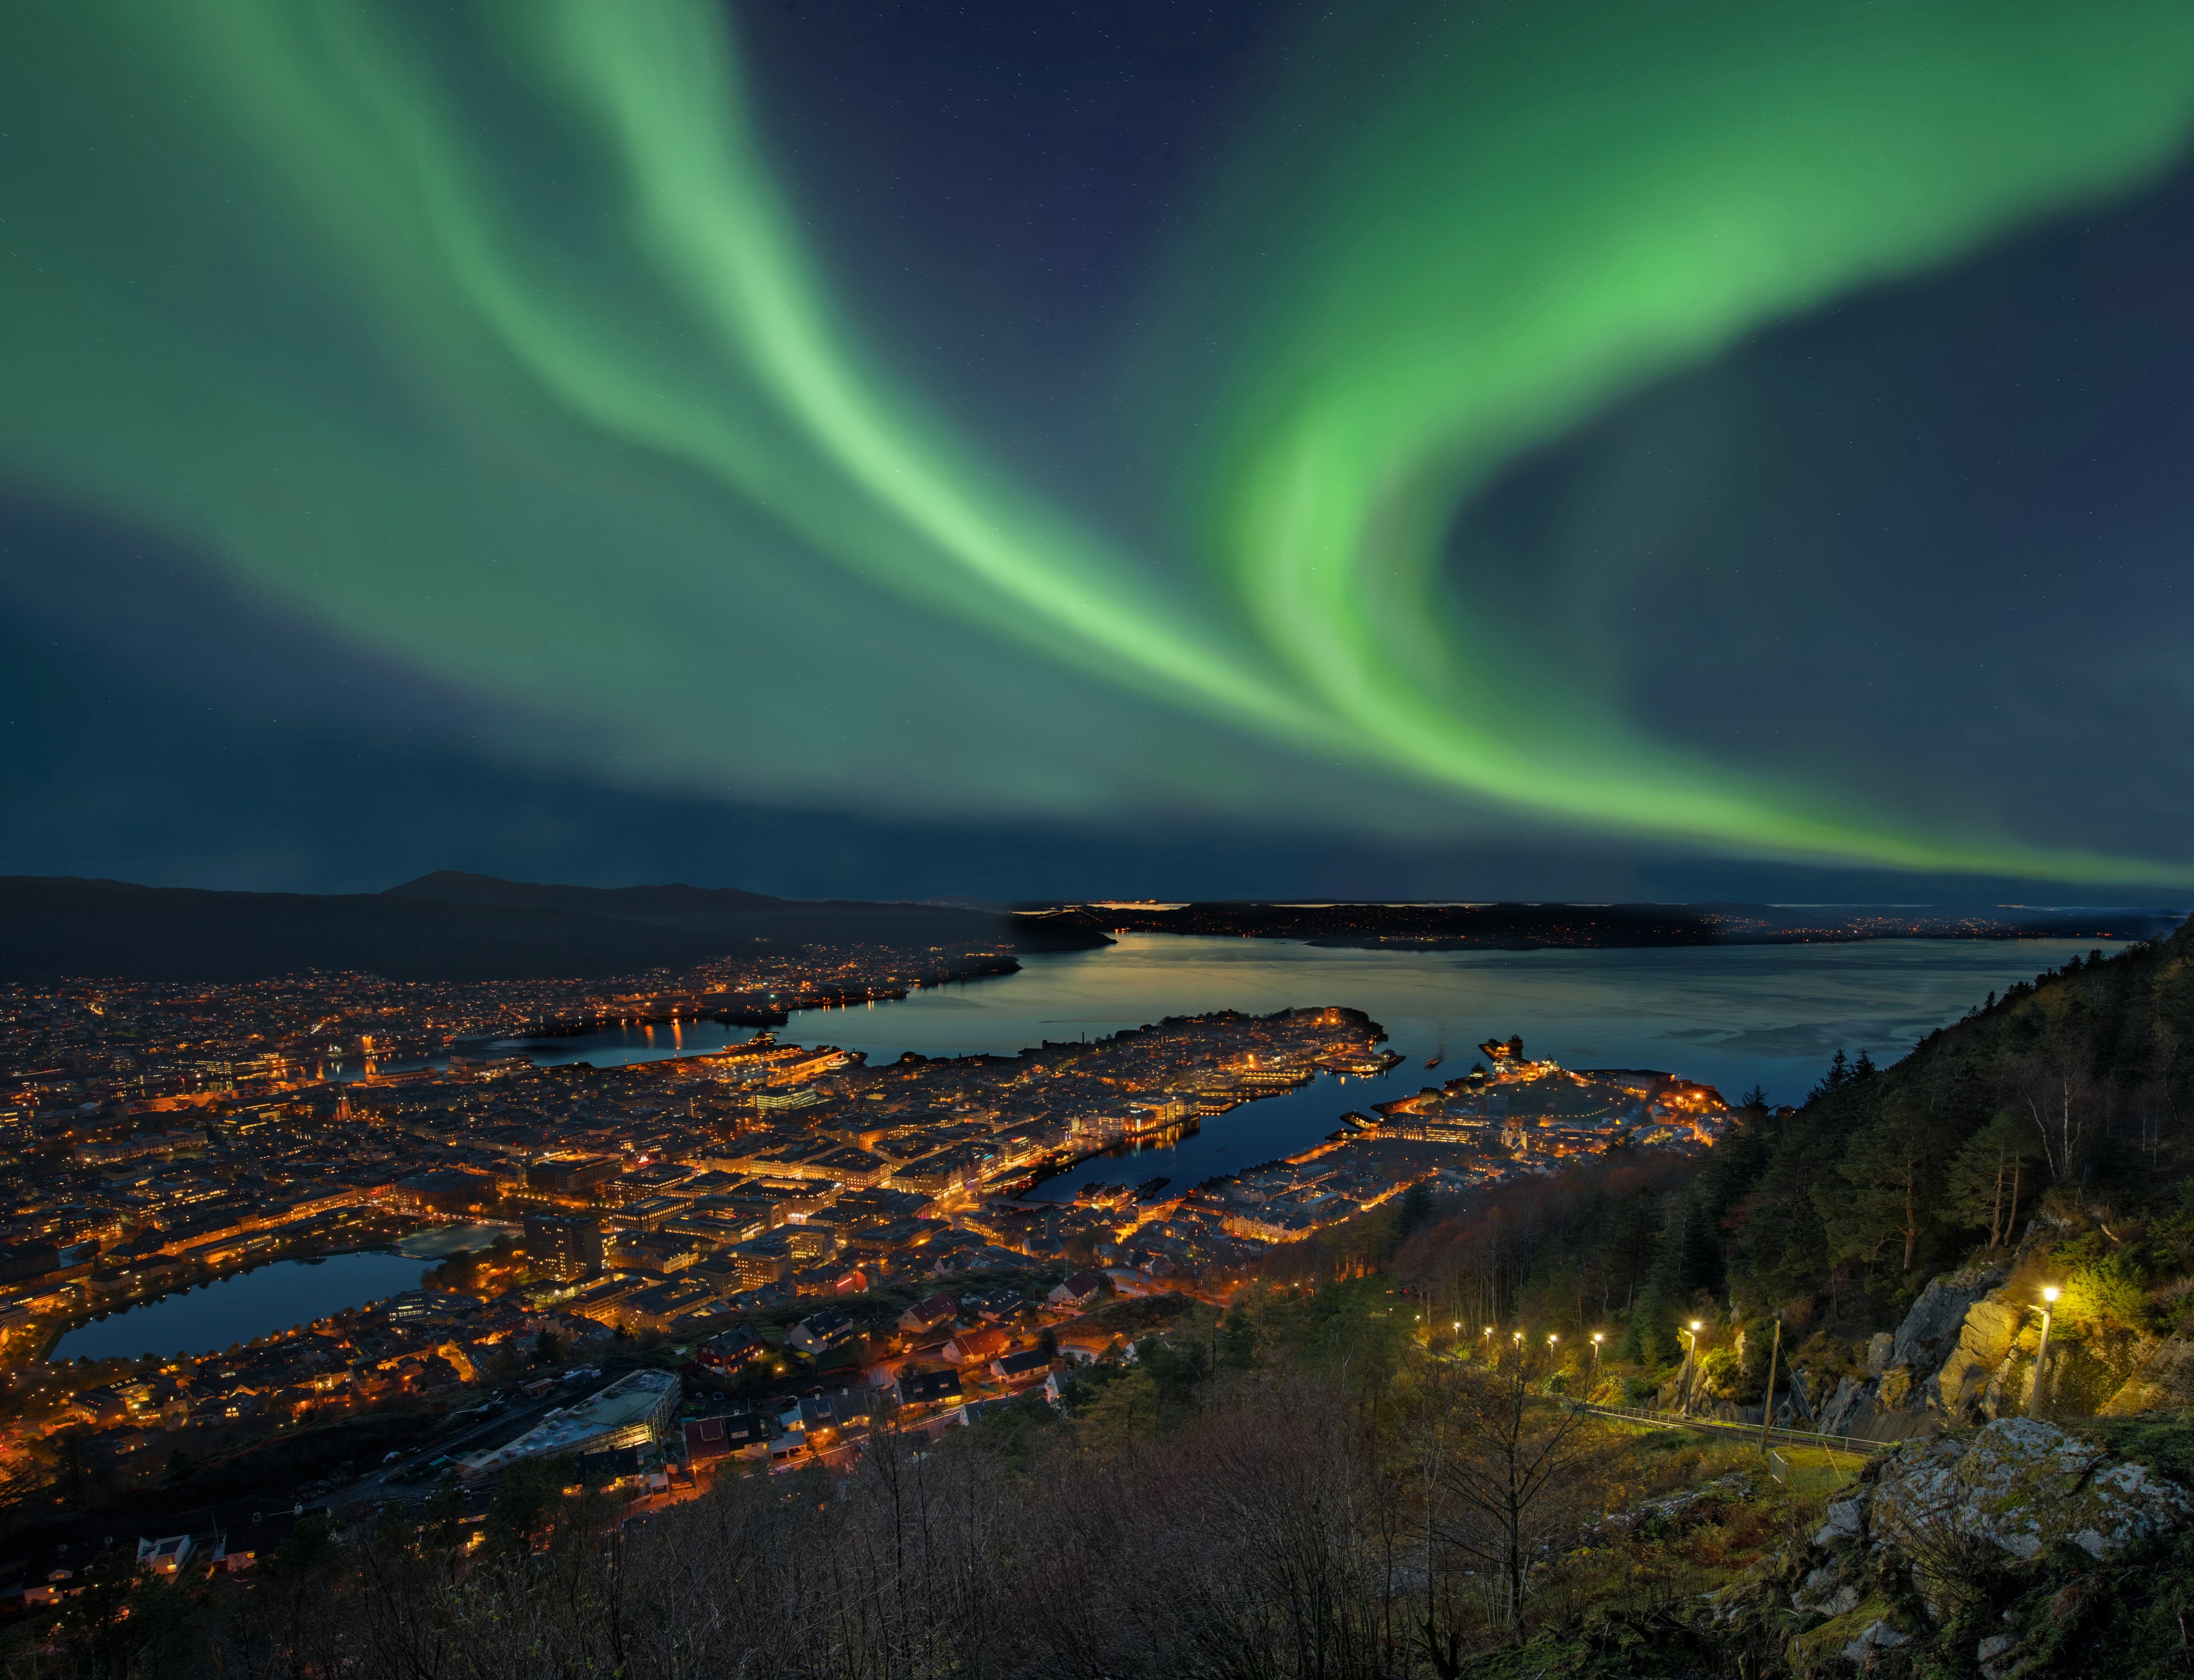 The Northern Lights over harbor of Bergen City, Norway. Image by RelaxFoto.de / Getty Image.